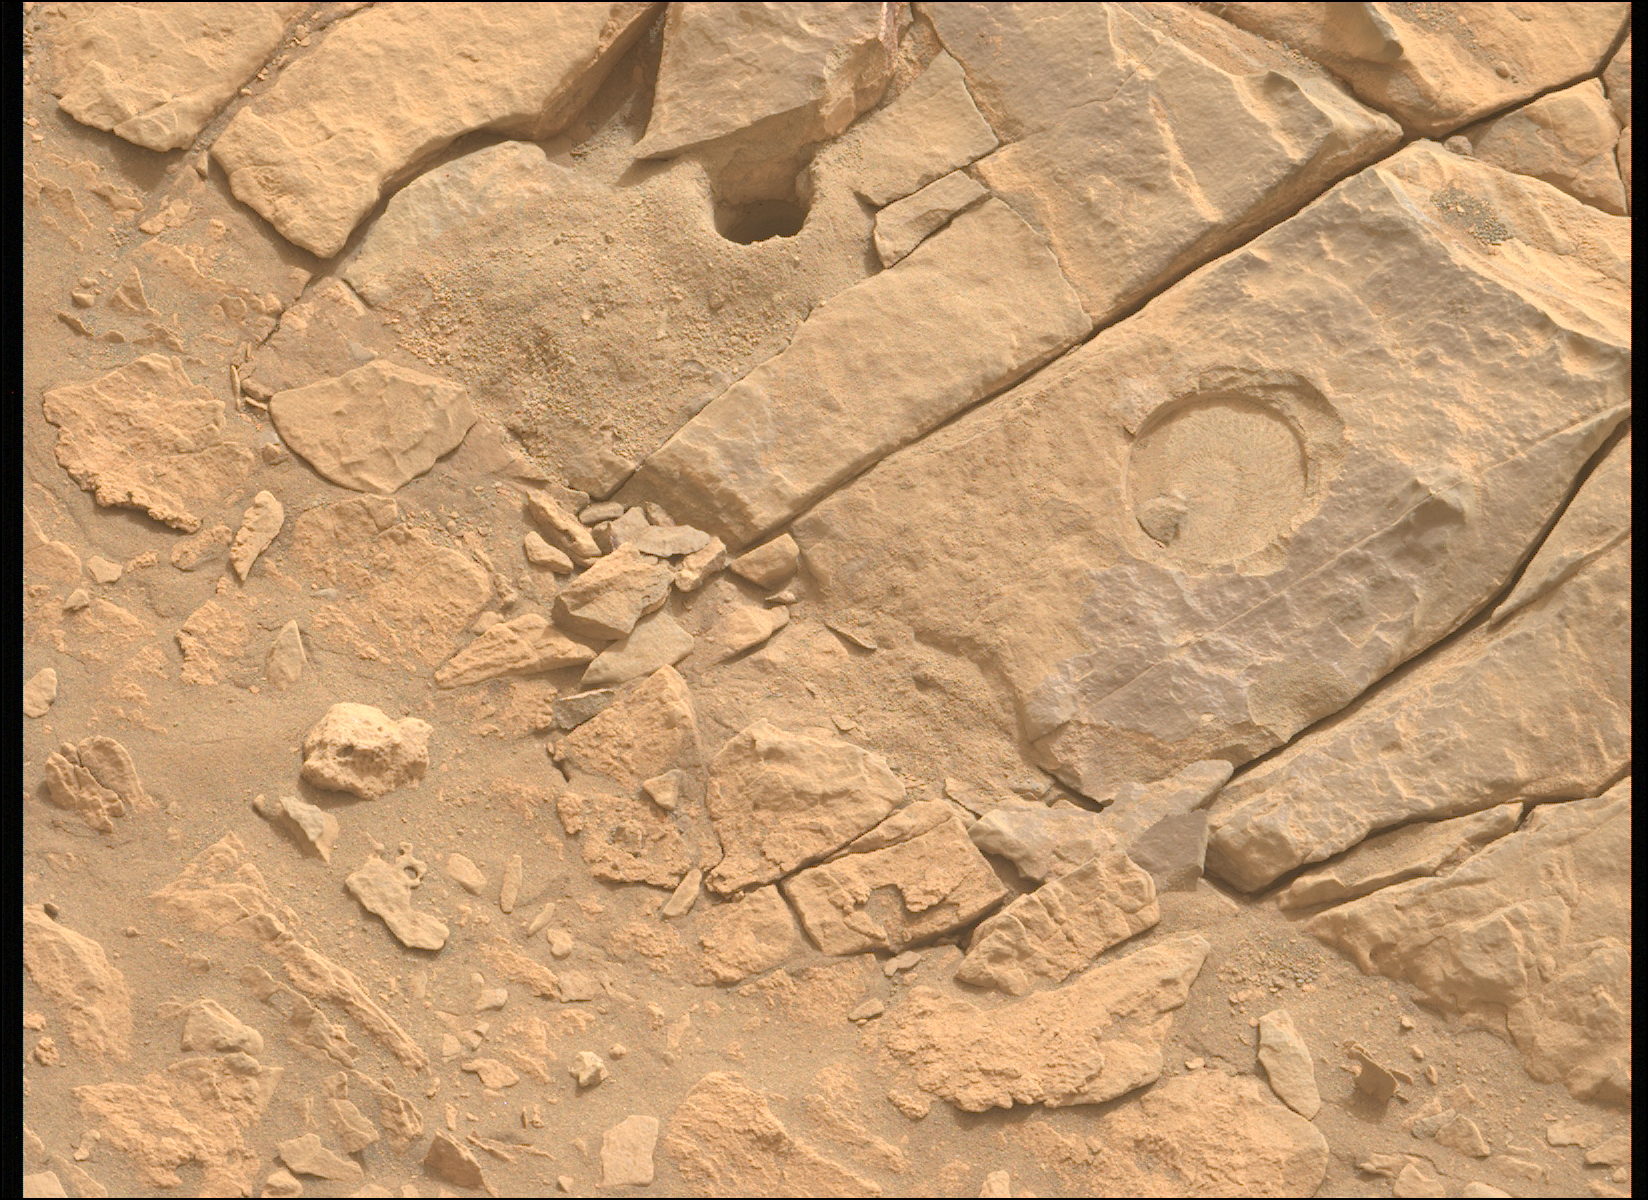 Image taken was taken by the Mars Perseverance rover after collecting the rock sample 15 at Mageik.